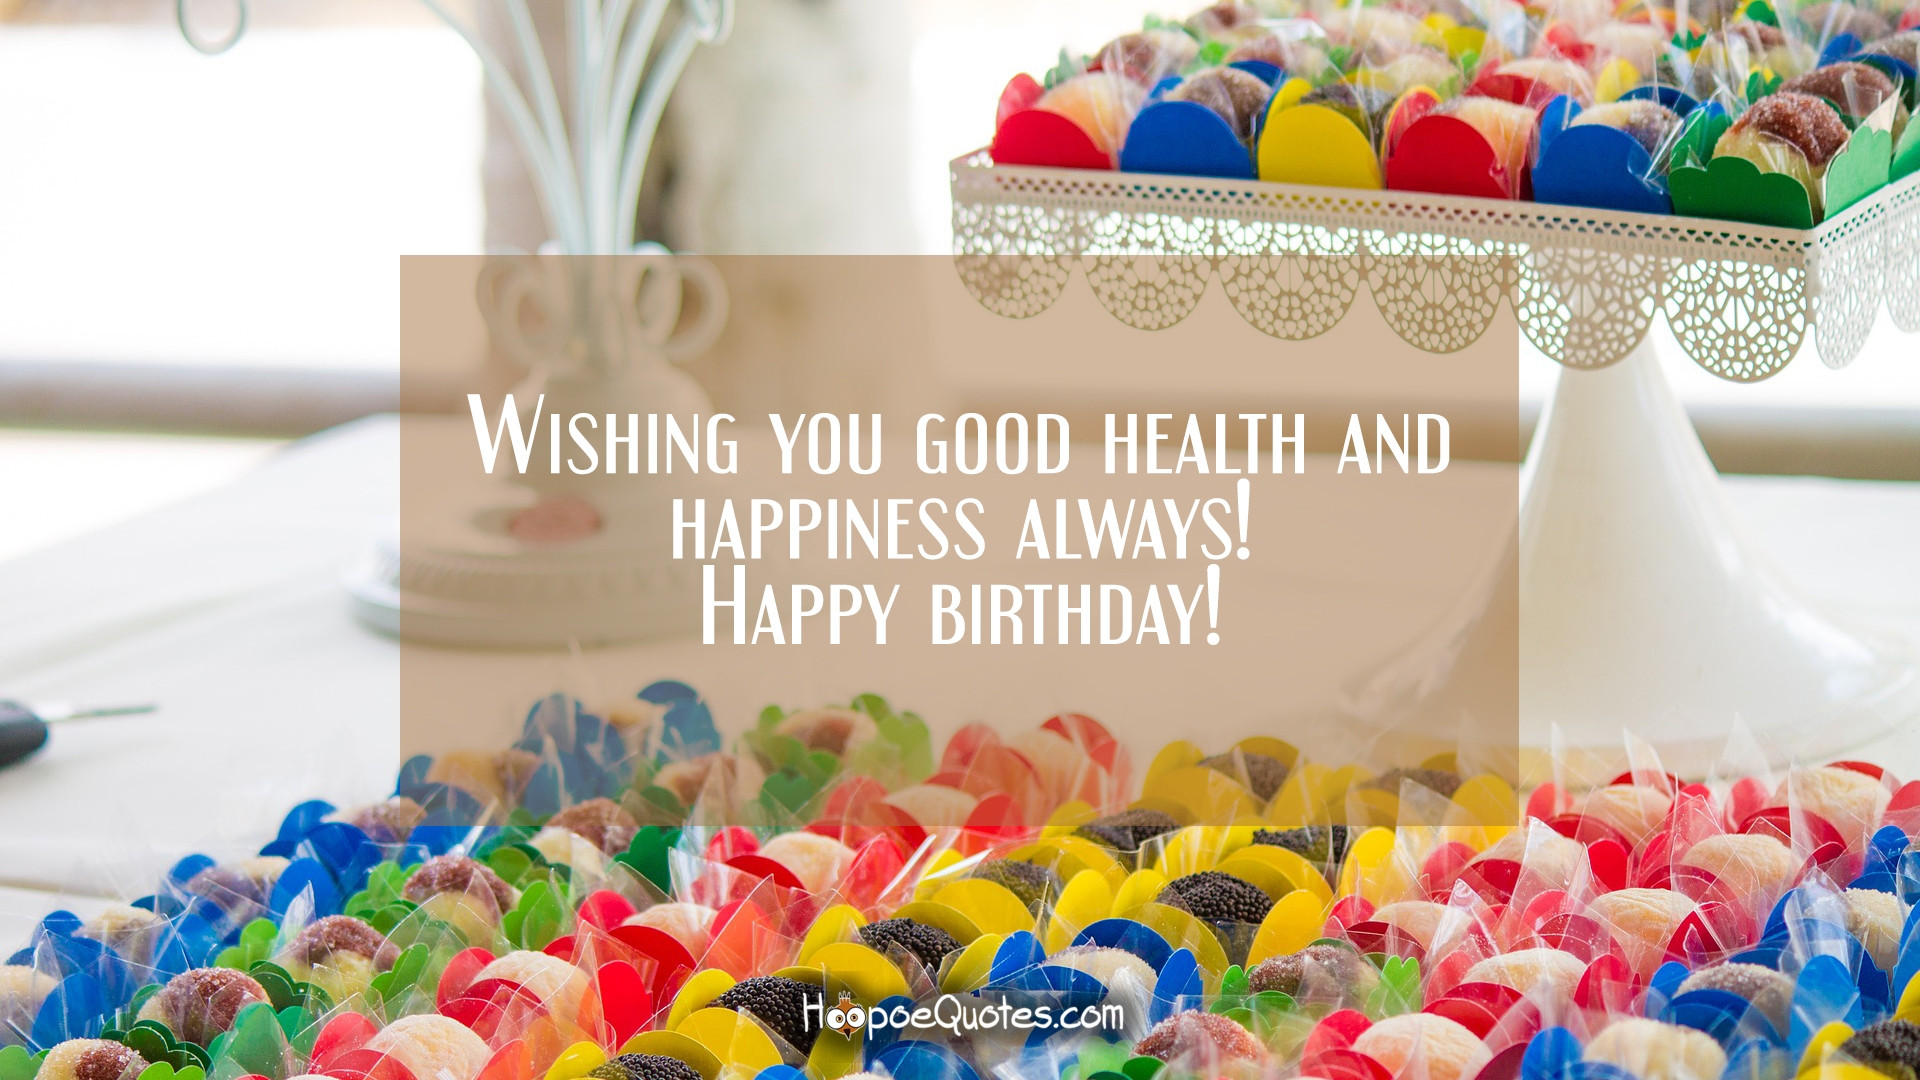 Birthday Wishes For Good Health
 Wishing you good health and happiness always Happy